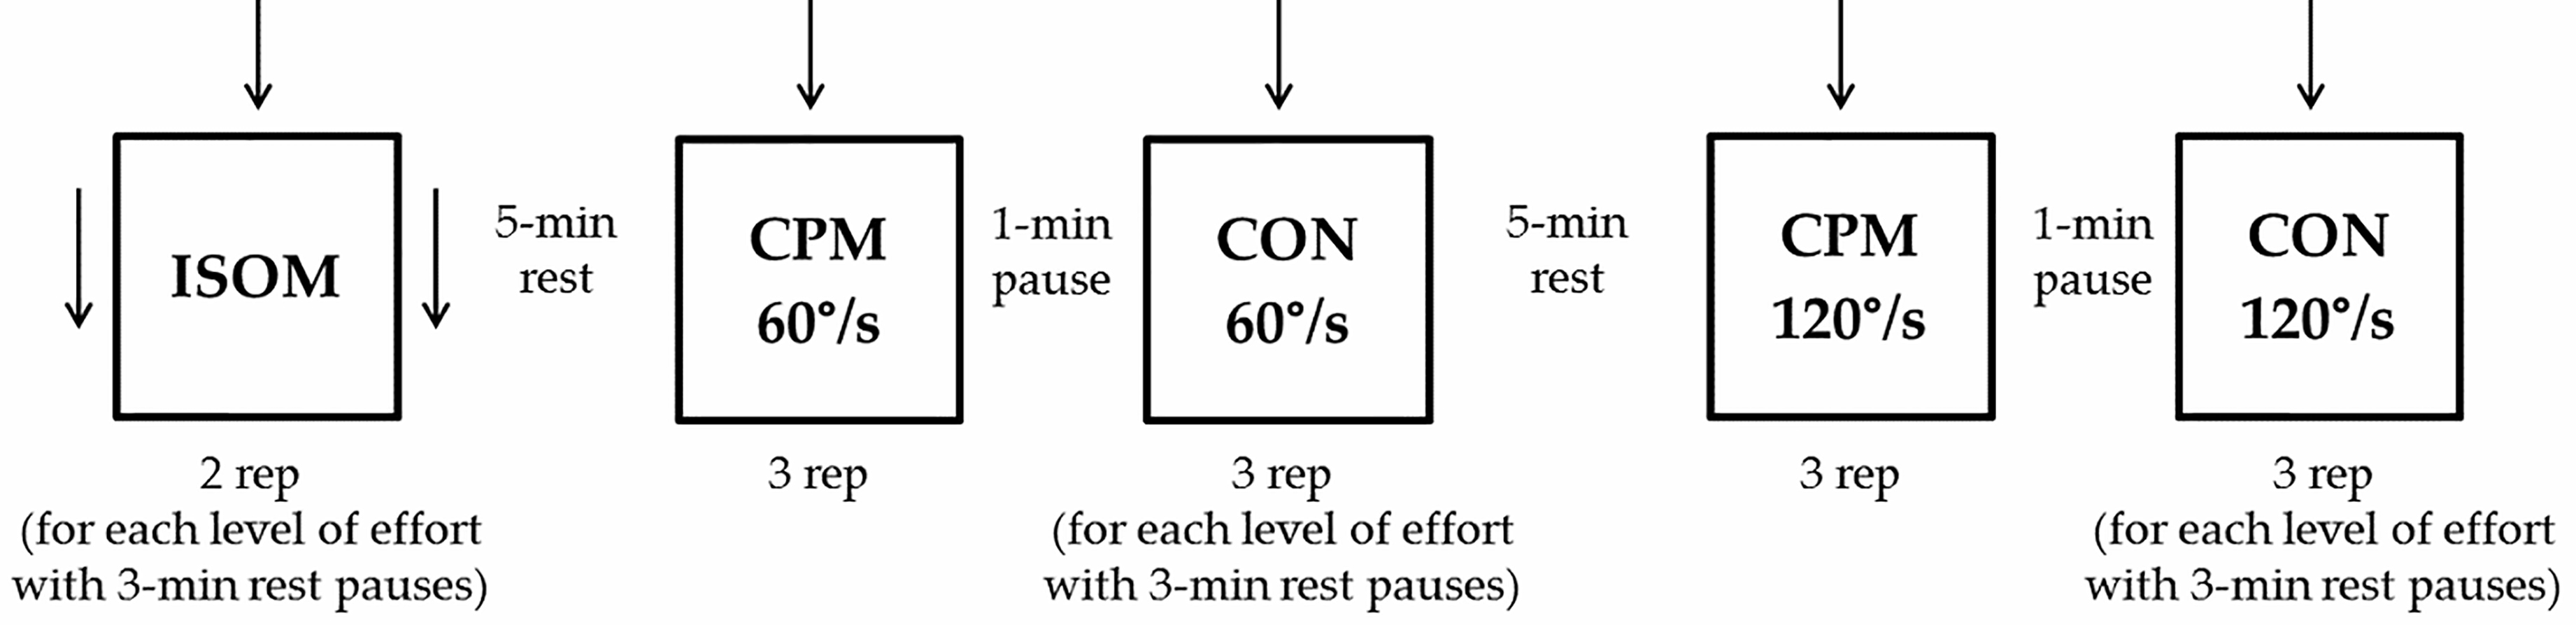 Schematic representation of the experimental protocol. Arrows represent doublet stimulation. ISOM: isometric contraction; CPM: continuous passive isokinetic motion; CON: isokinetic concentric contraction; rep: repetitions.